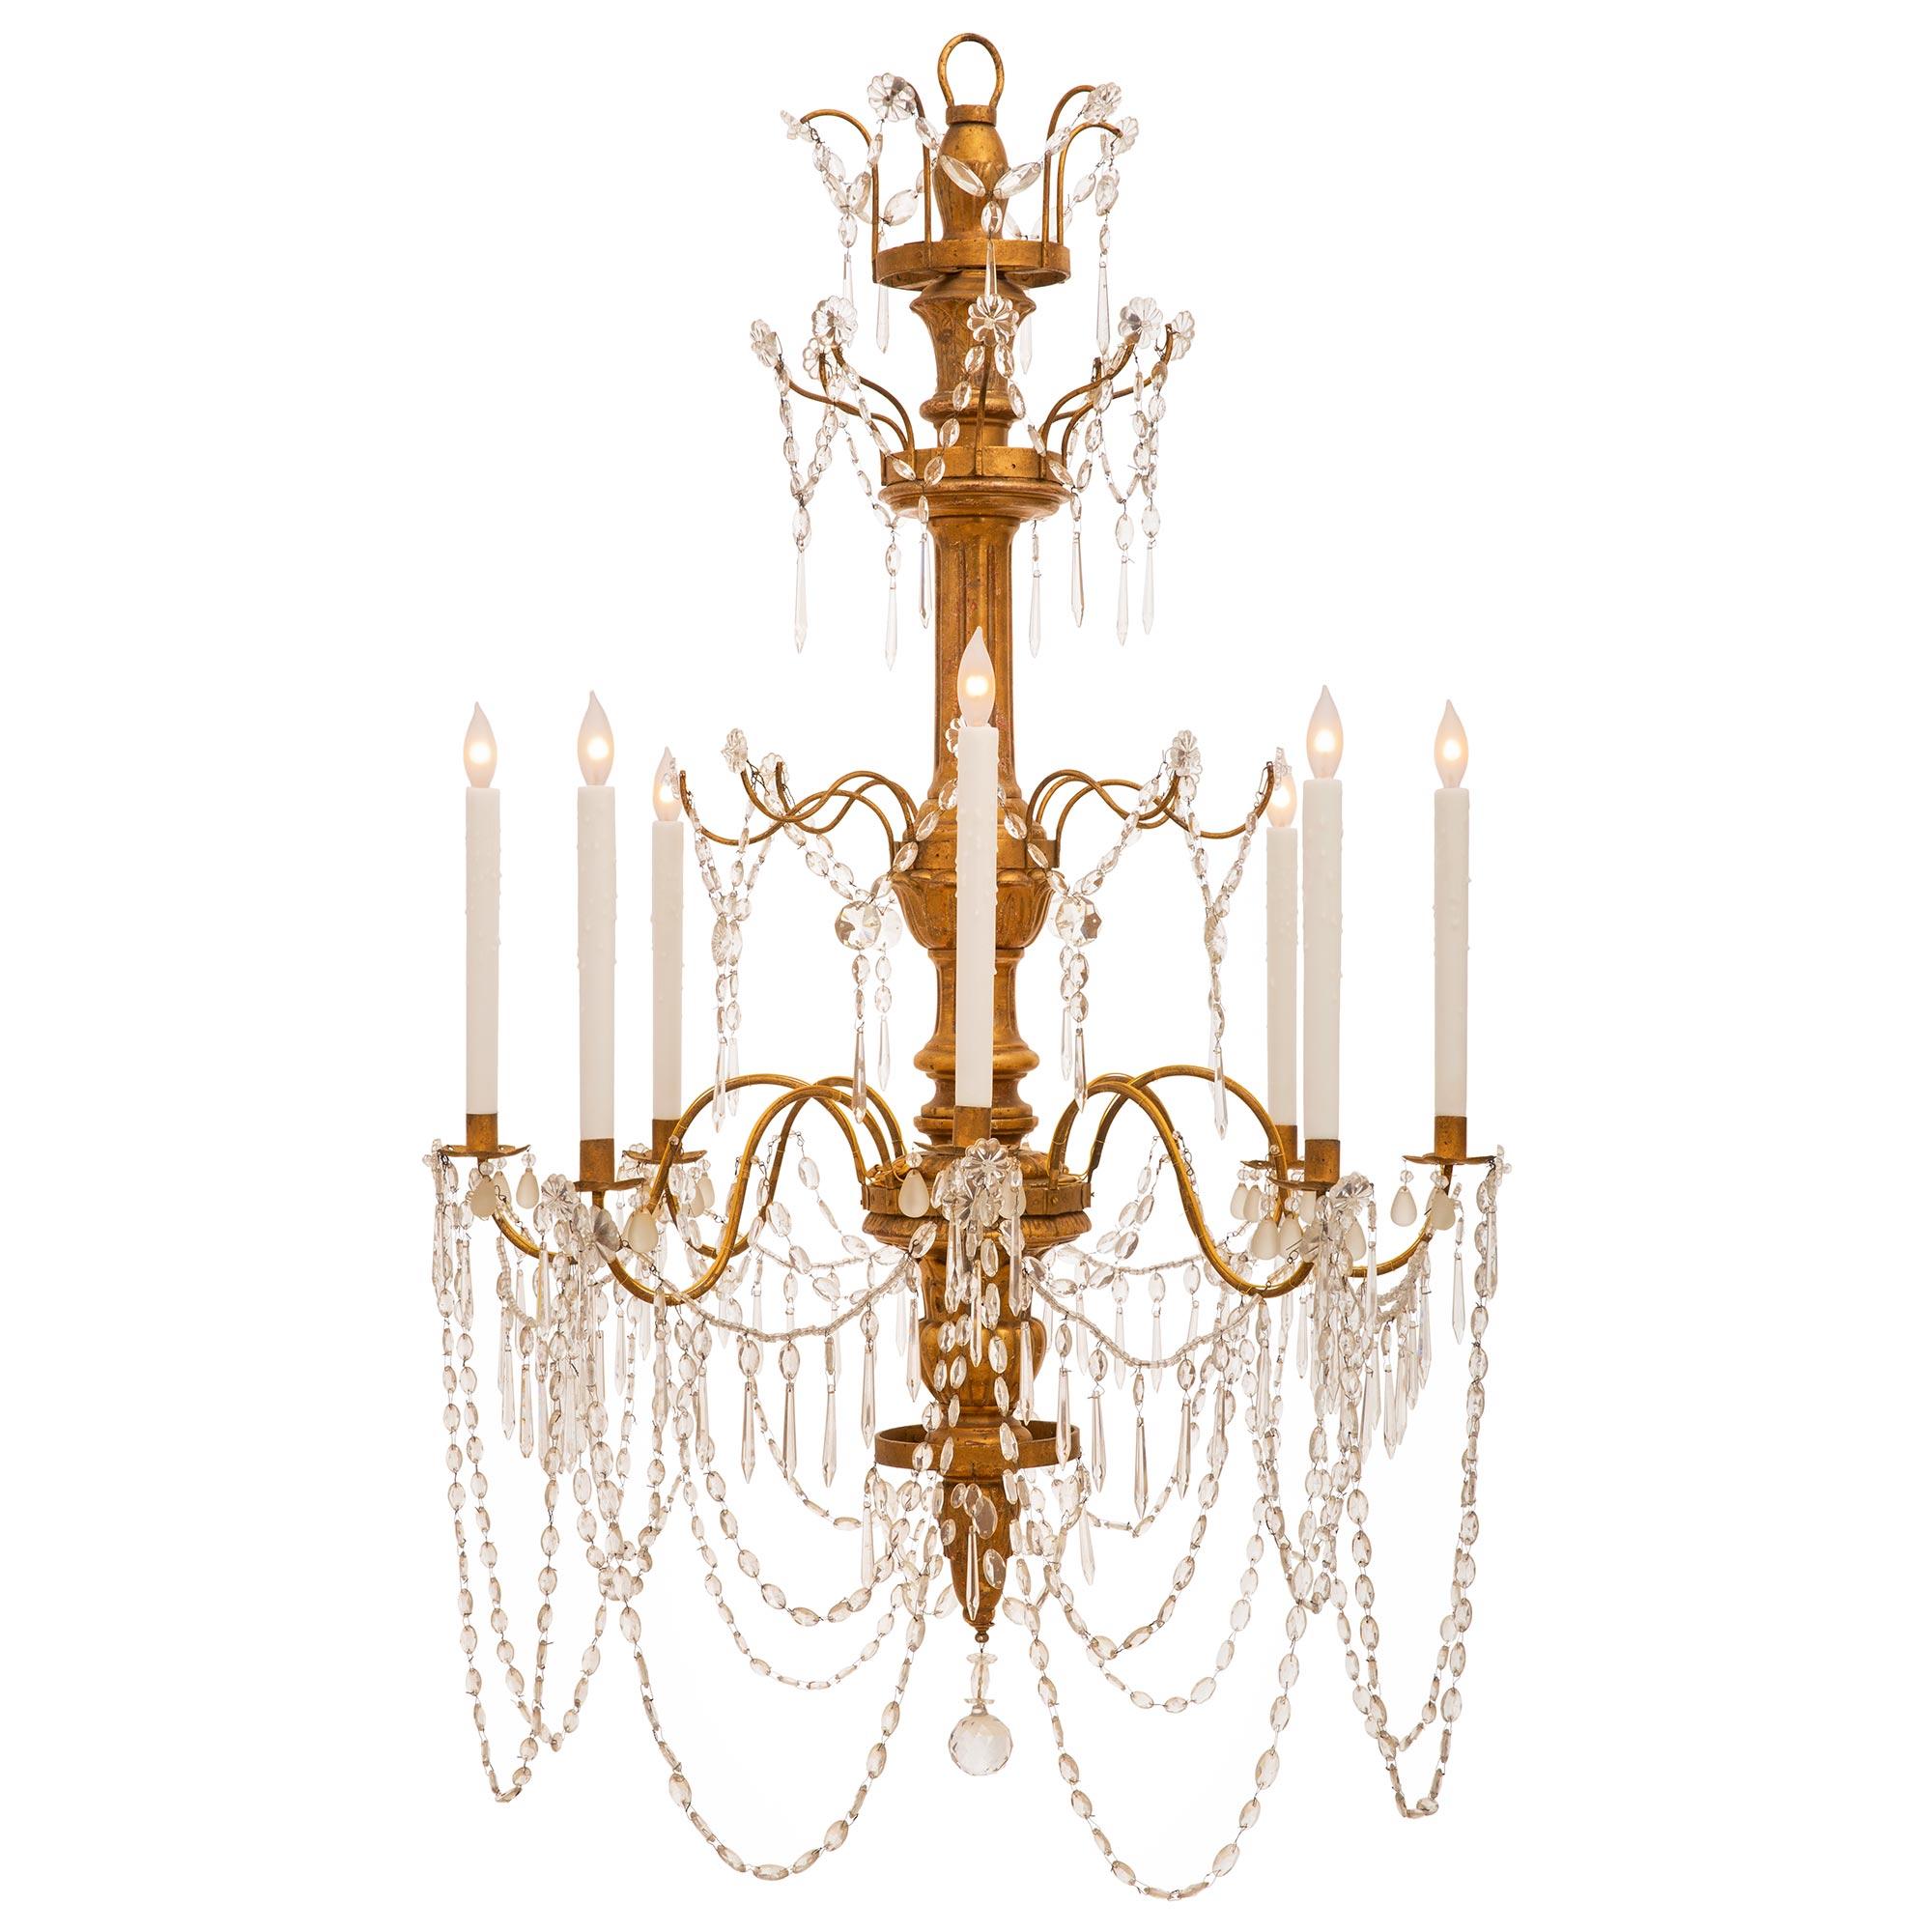 An early 19th century Italian giltwood, glass and crystal eight light chandeliers. This elegant chandelier has a carved giltwood central fut with bottom finial and crystal ball pendant. Crystal garlands join the 'S' scrolled metal arms. Additional